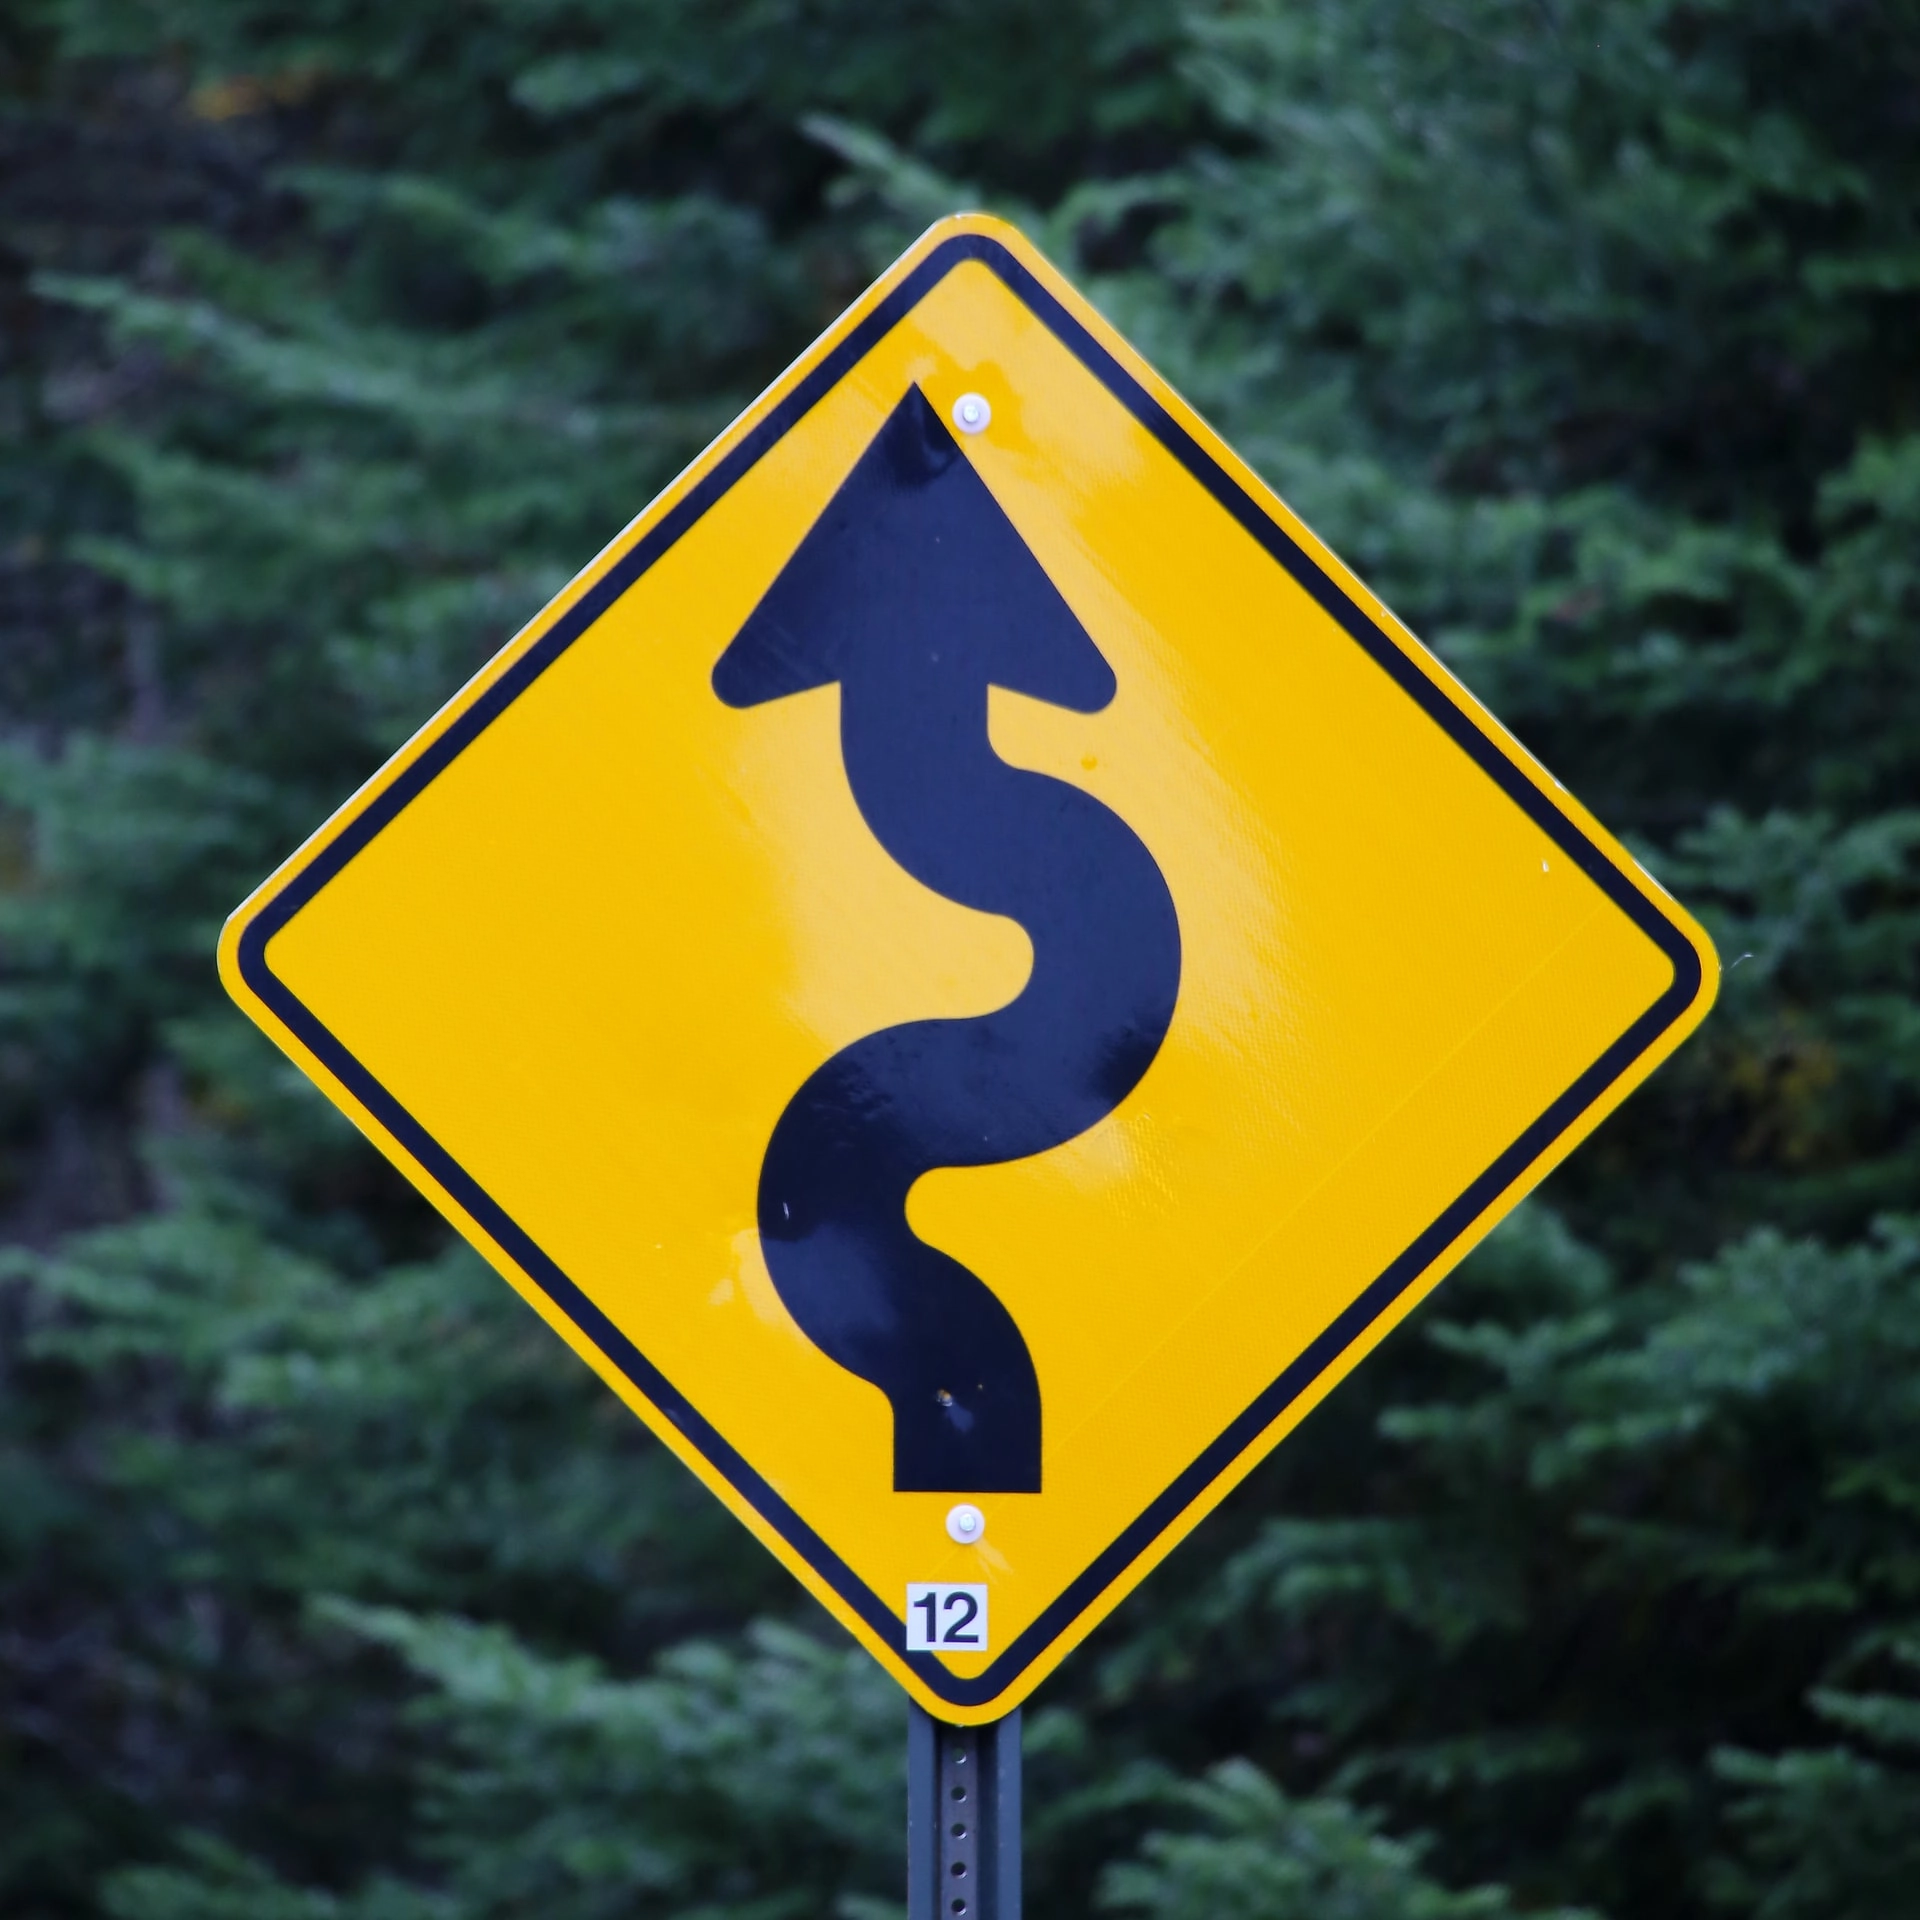 Image of a winding road warning sign.